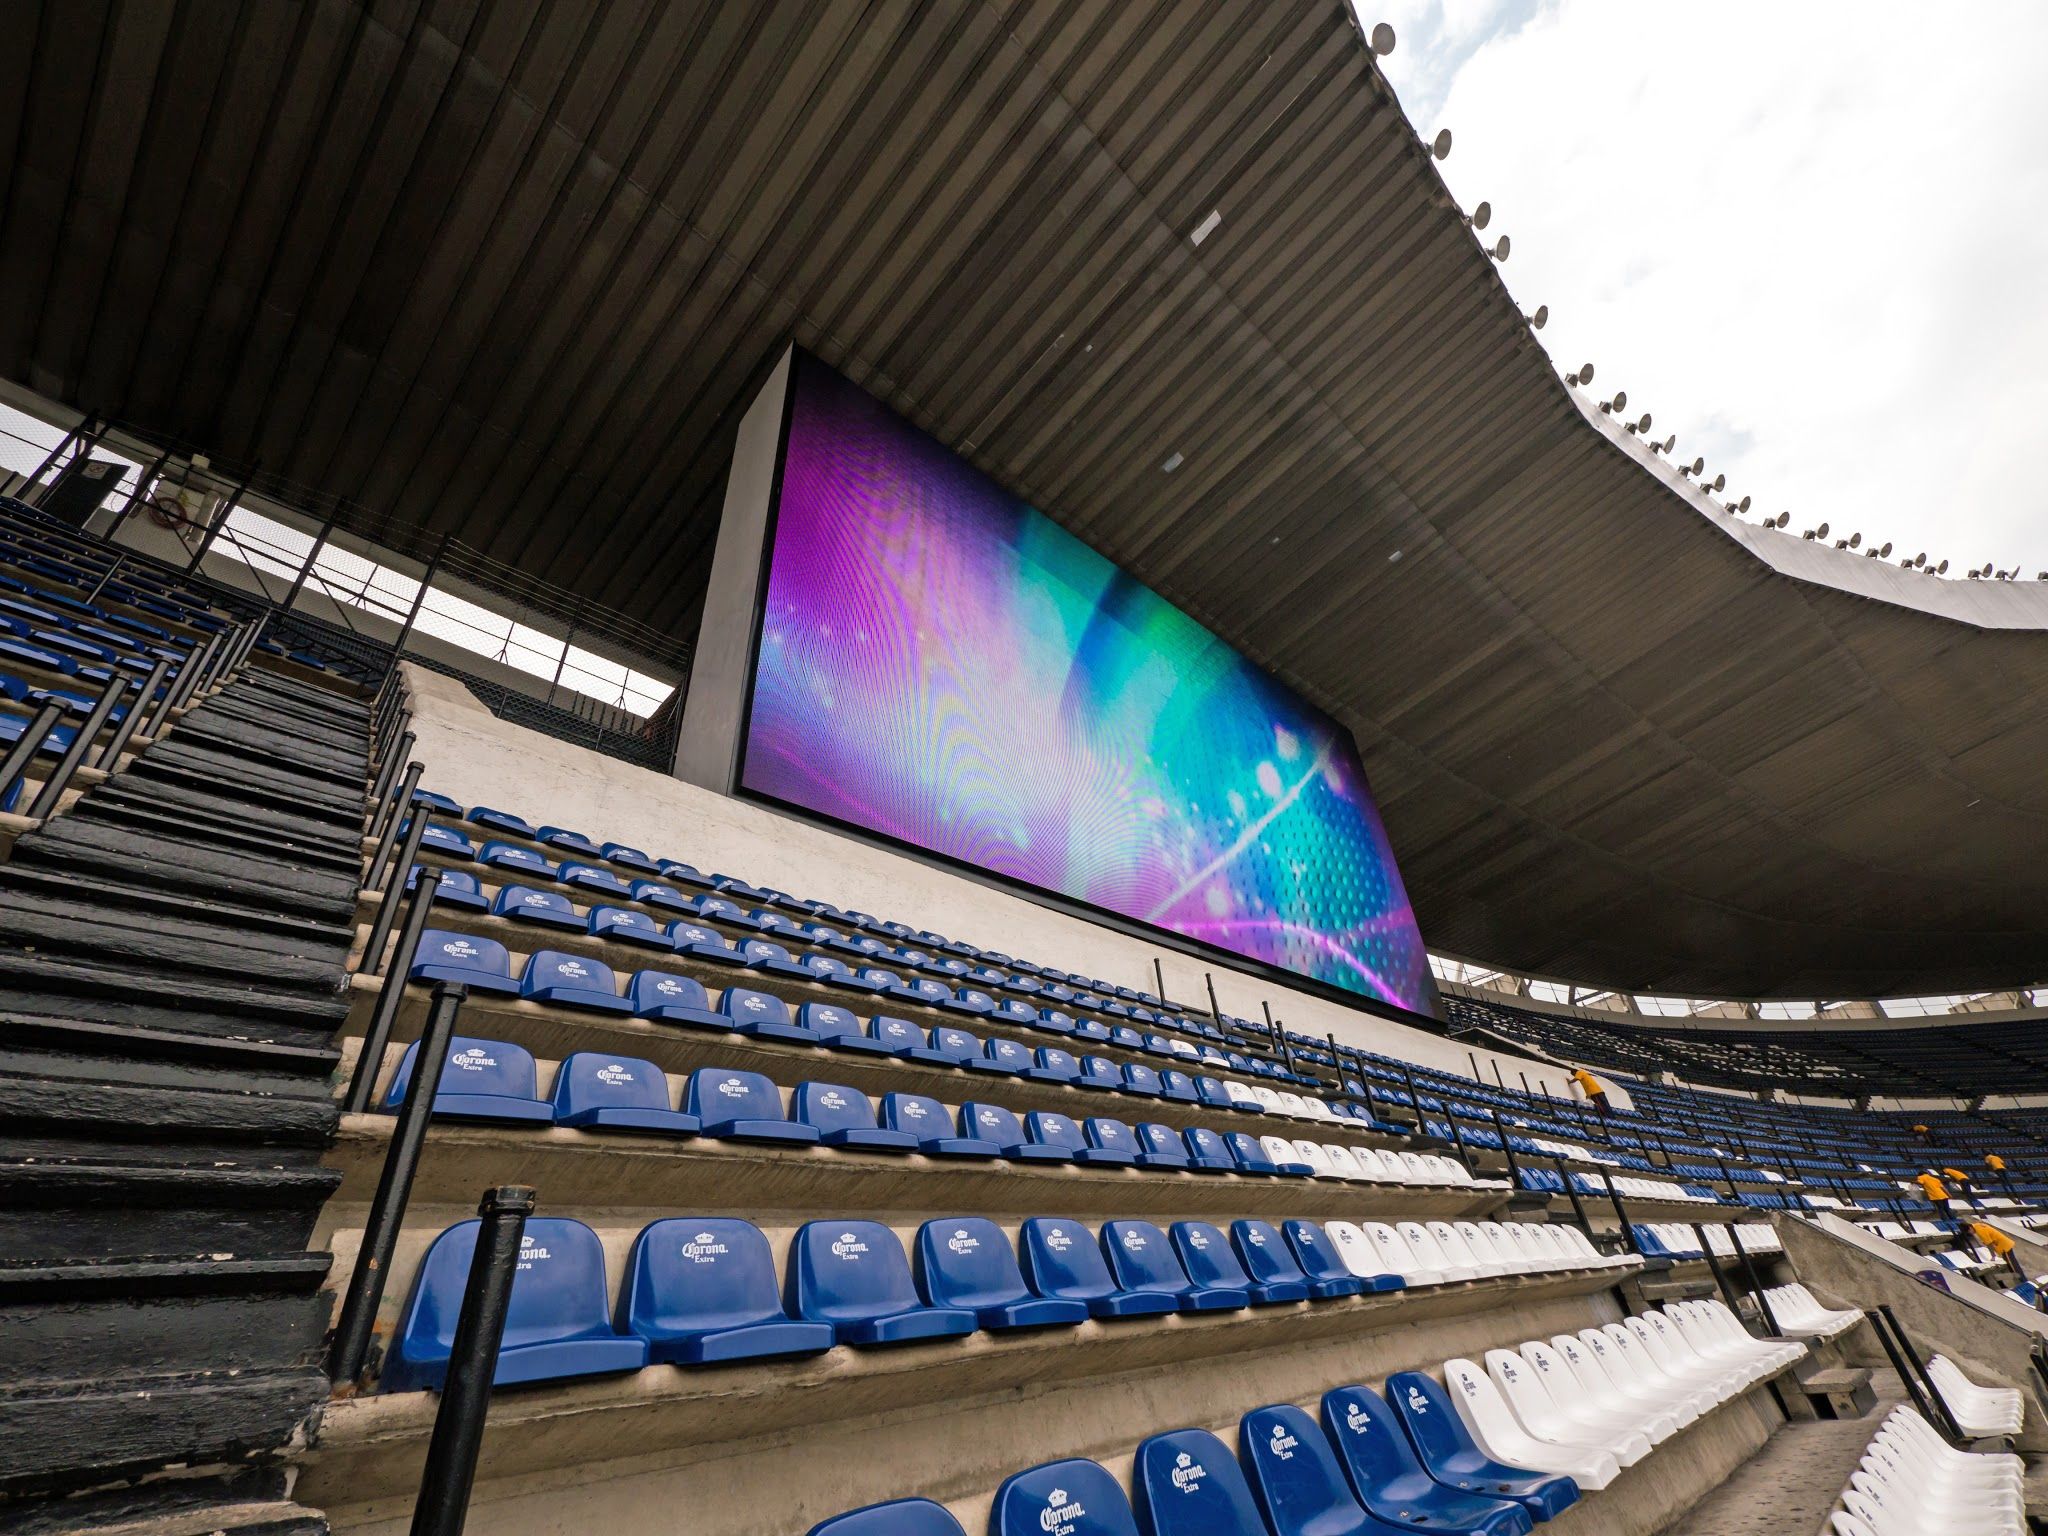 Panasonic's LED Large Screen Displays Provide An All New Fan Experience At Estadio Azteca In Mexico City